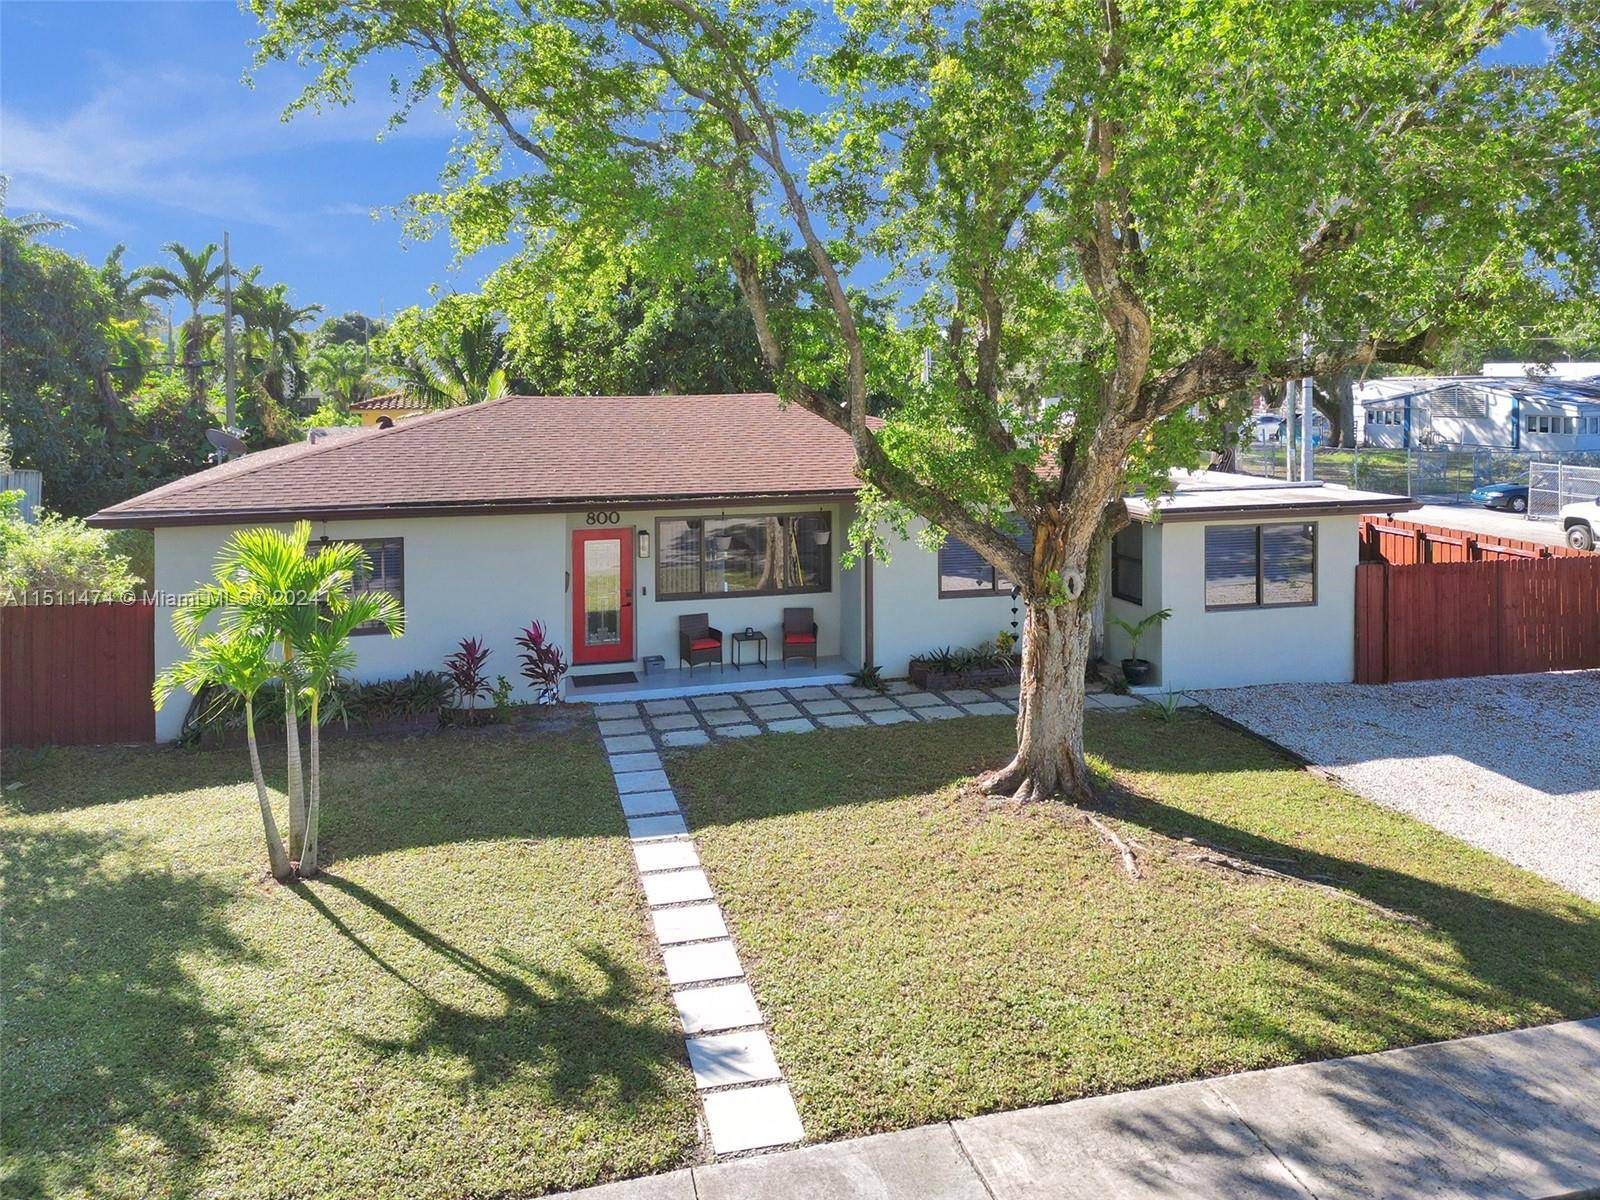 Completely remodeled and fully furnished home in North Miami Beach !